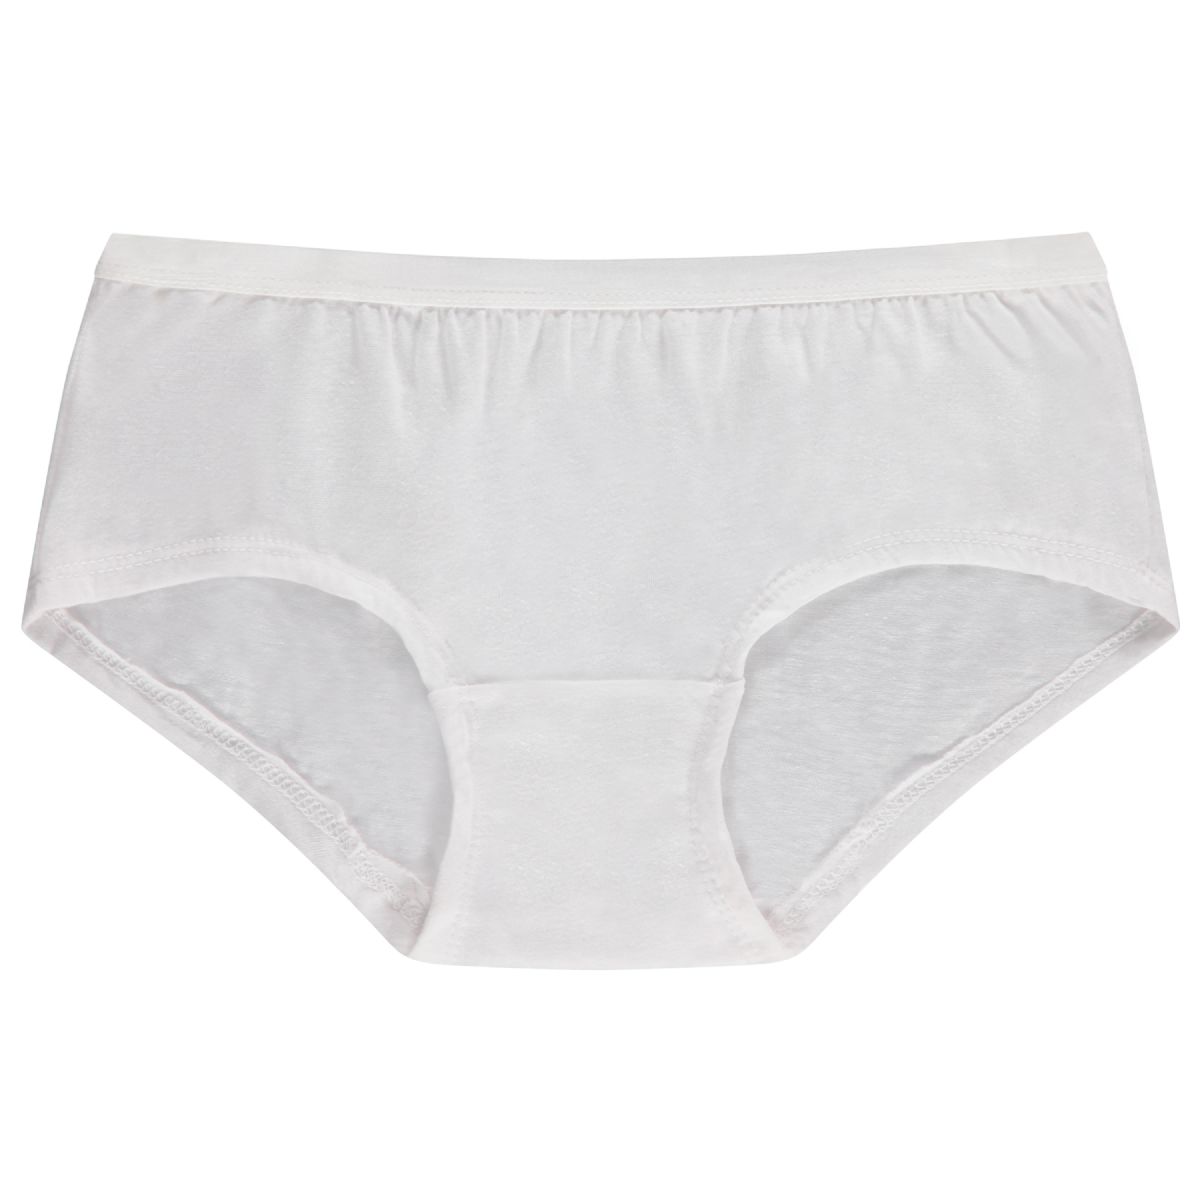 wholesale daily use 95% cotton underwear